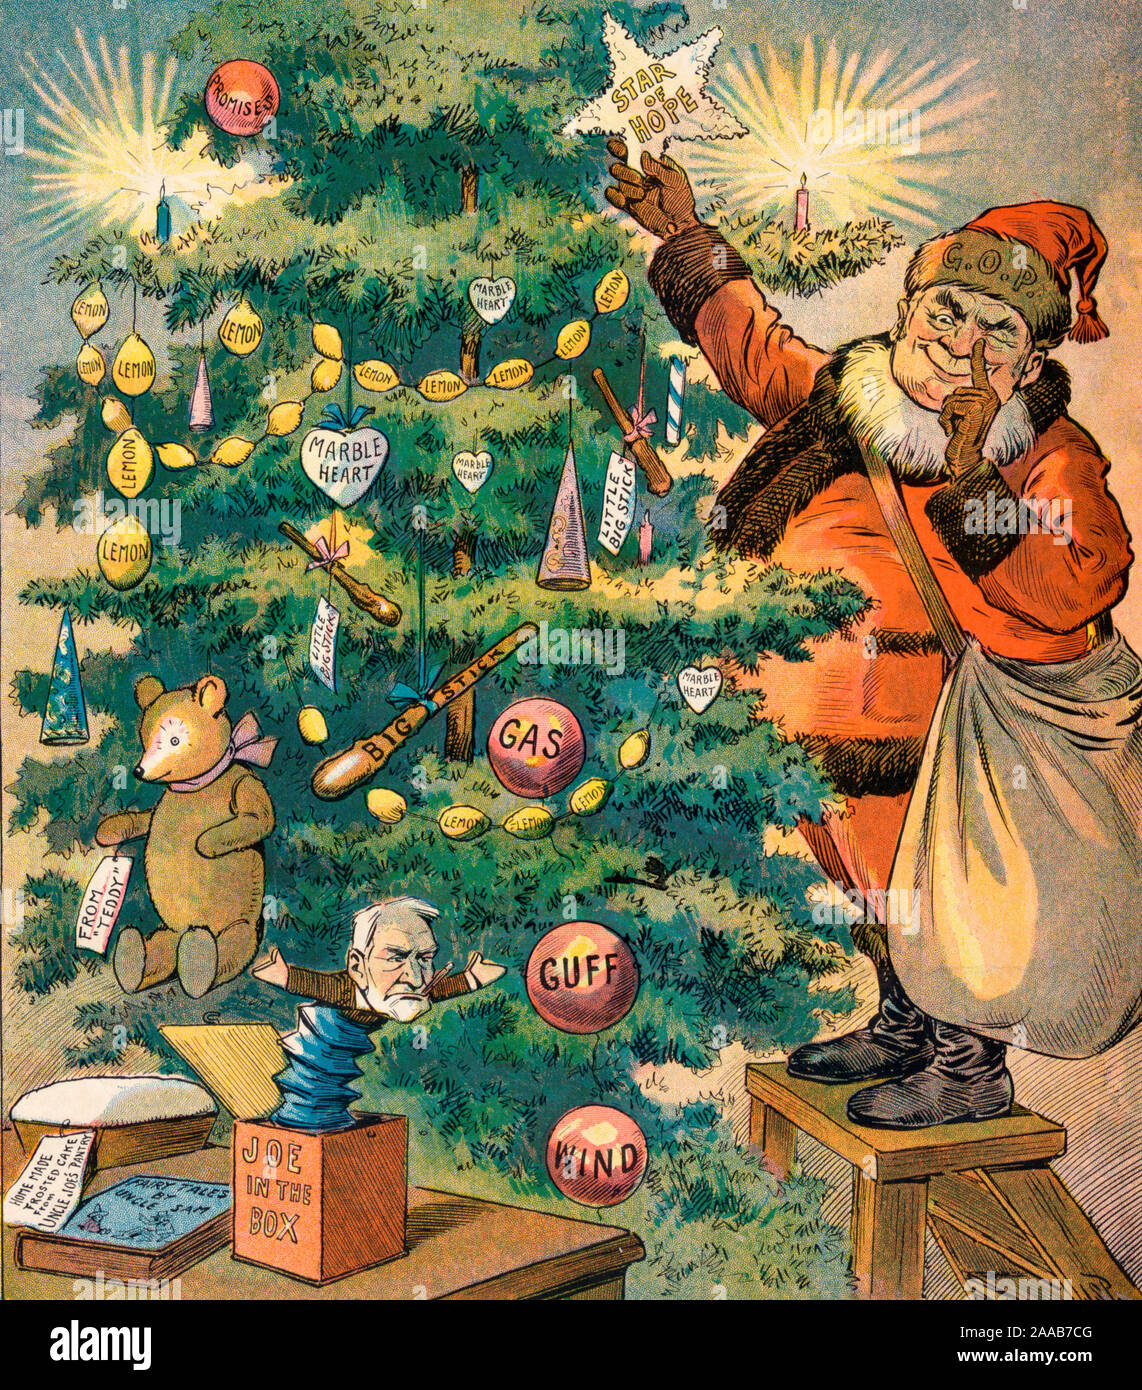 Trimming the Filipino's Christmas tree - Illustration shows Chauncey M. Depew as Santa Claus labeled G.O.P., reaching to place the Star of Hope on top of a Christmas tree trimmed with lemons, marble hearts, Little Big Stick and Big Stick and three balloons labeled Gas, Guff, and Wind, and on a nearby table is Joseph Cannon as a Joe in the Box along with a Home made frosted cake from Uncle Joe's Pantry. Political Cartoon, 1906 Stock Photo